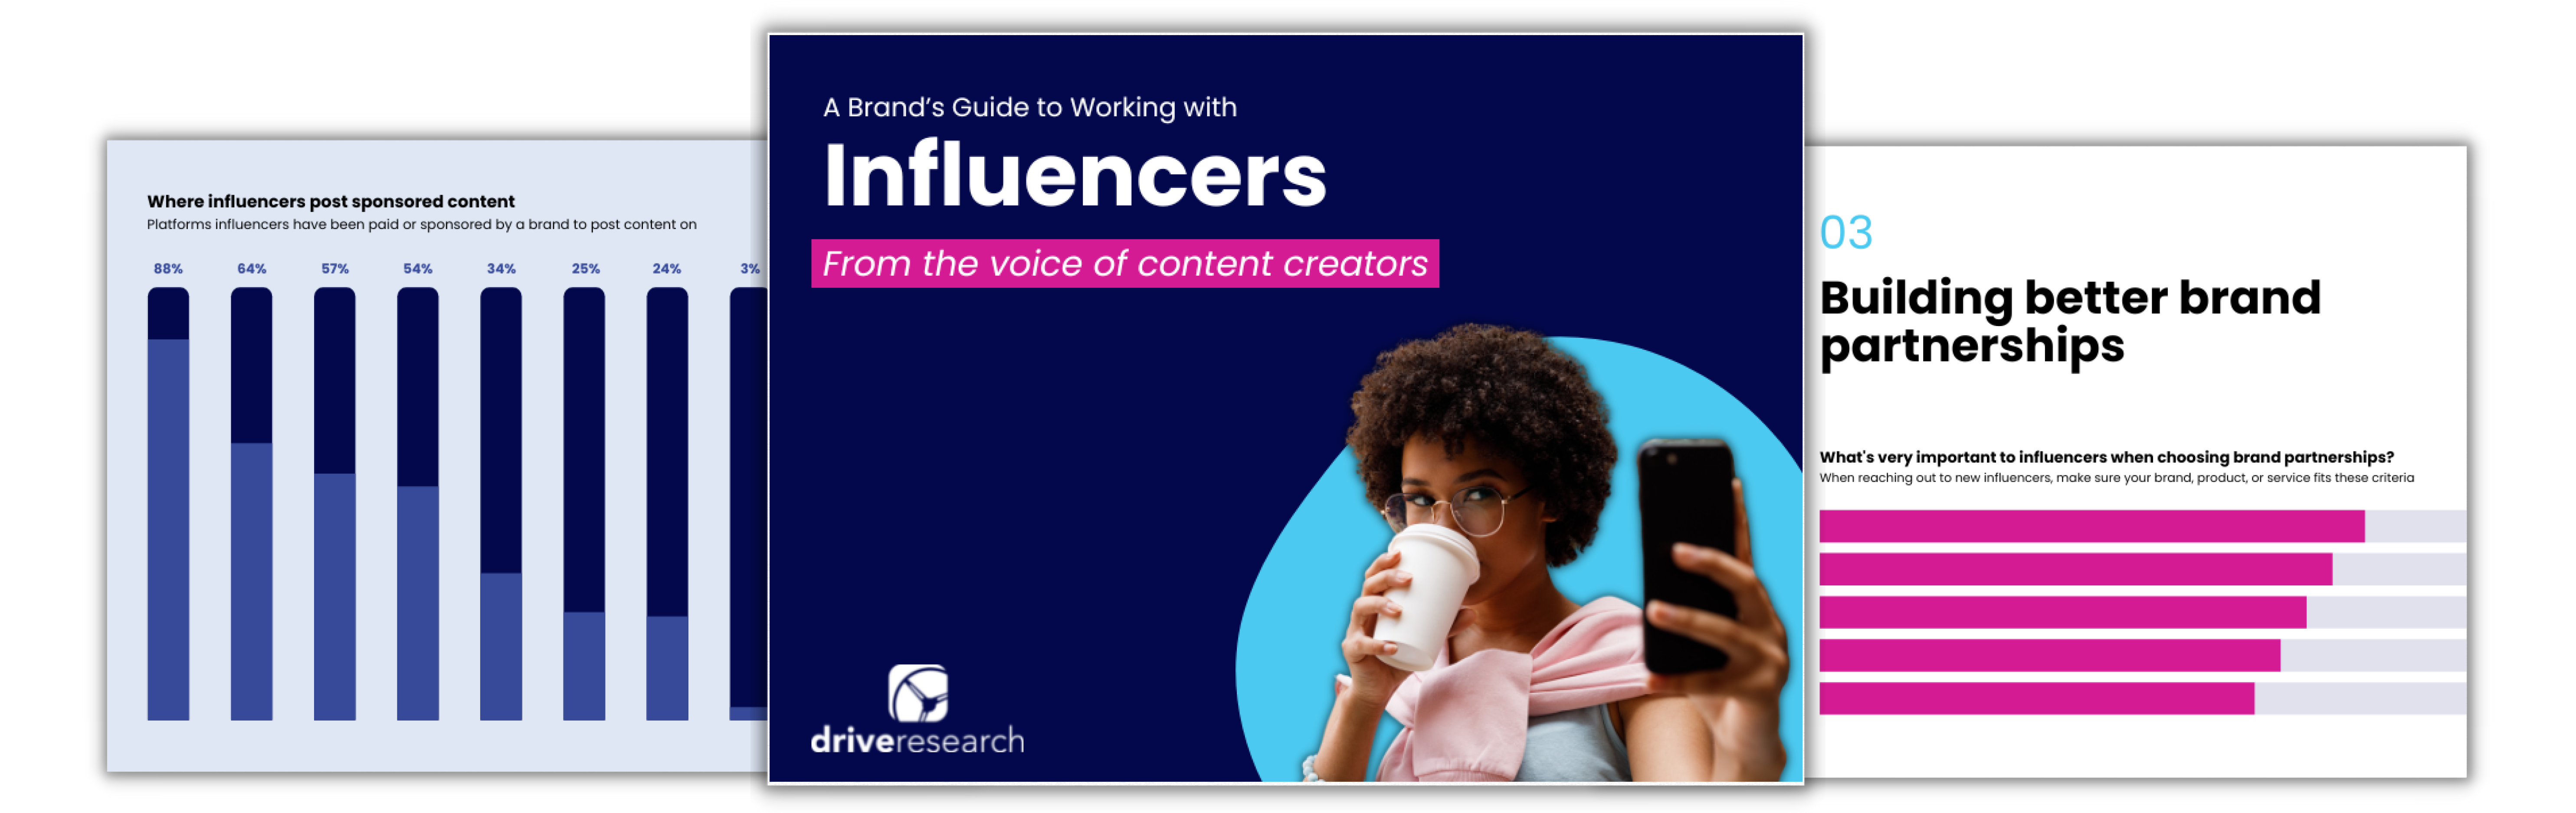 visuals of influencer survey by drive research